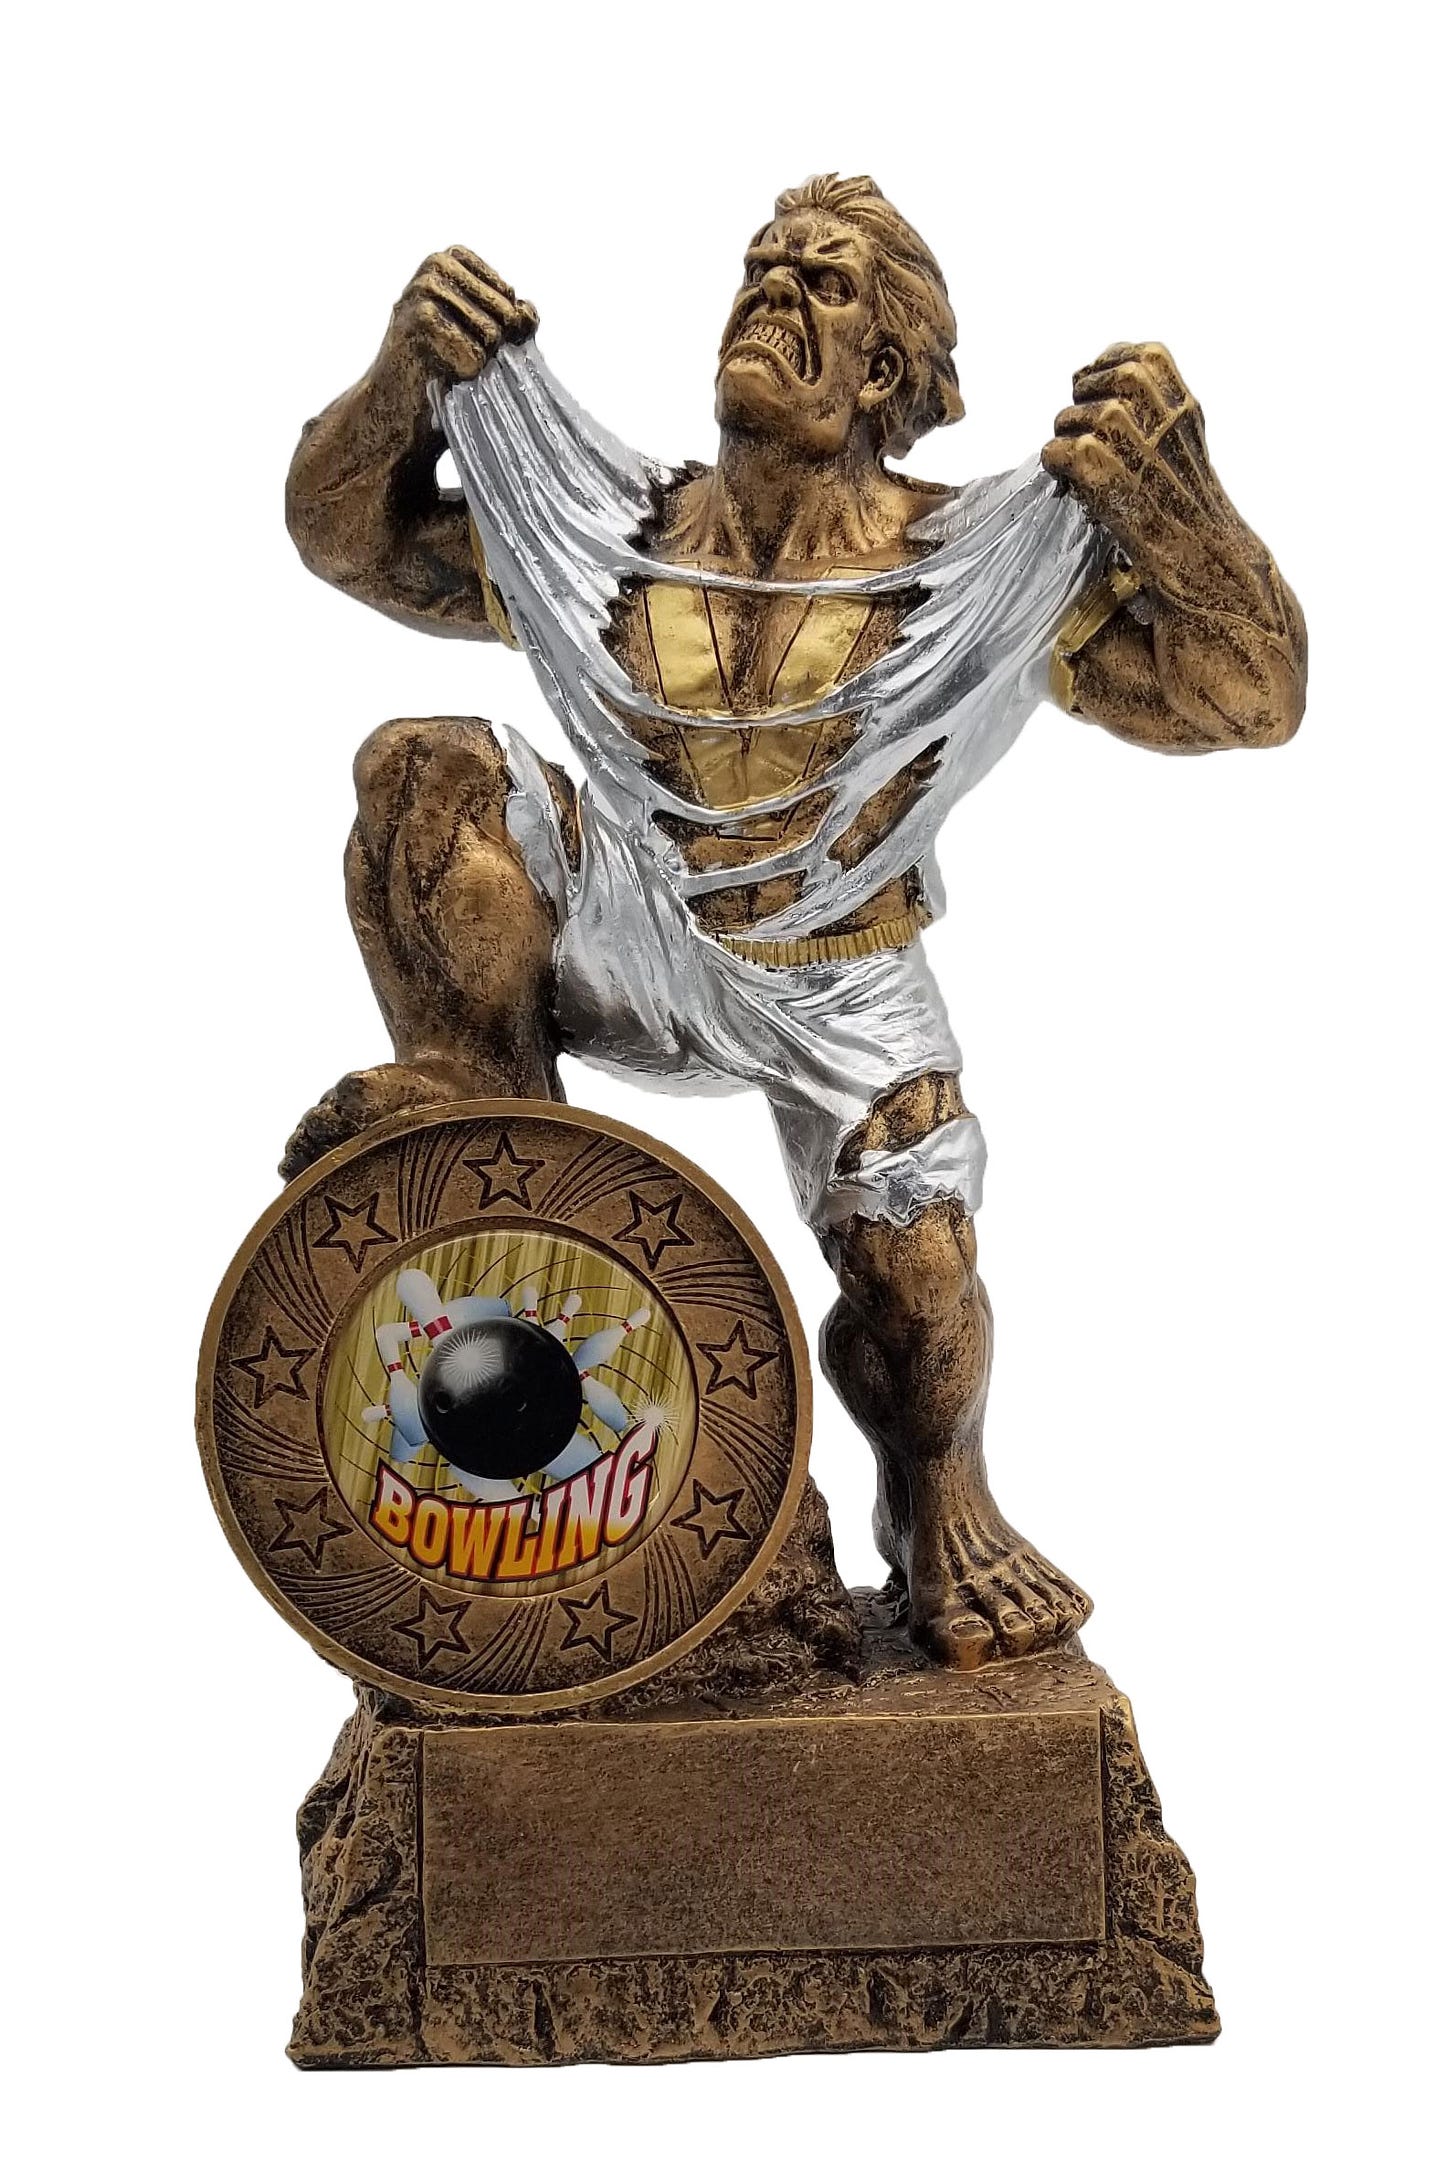 Bowling LARGE Monster Trophy | Engraved Bowler GIANT Beast Award - 9.5 Inch  Tall